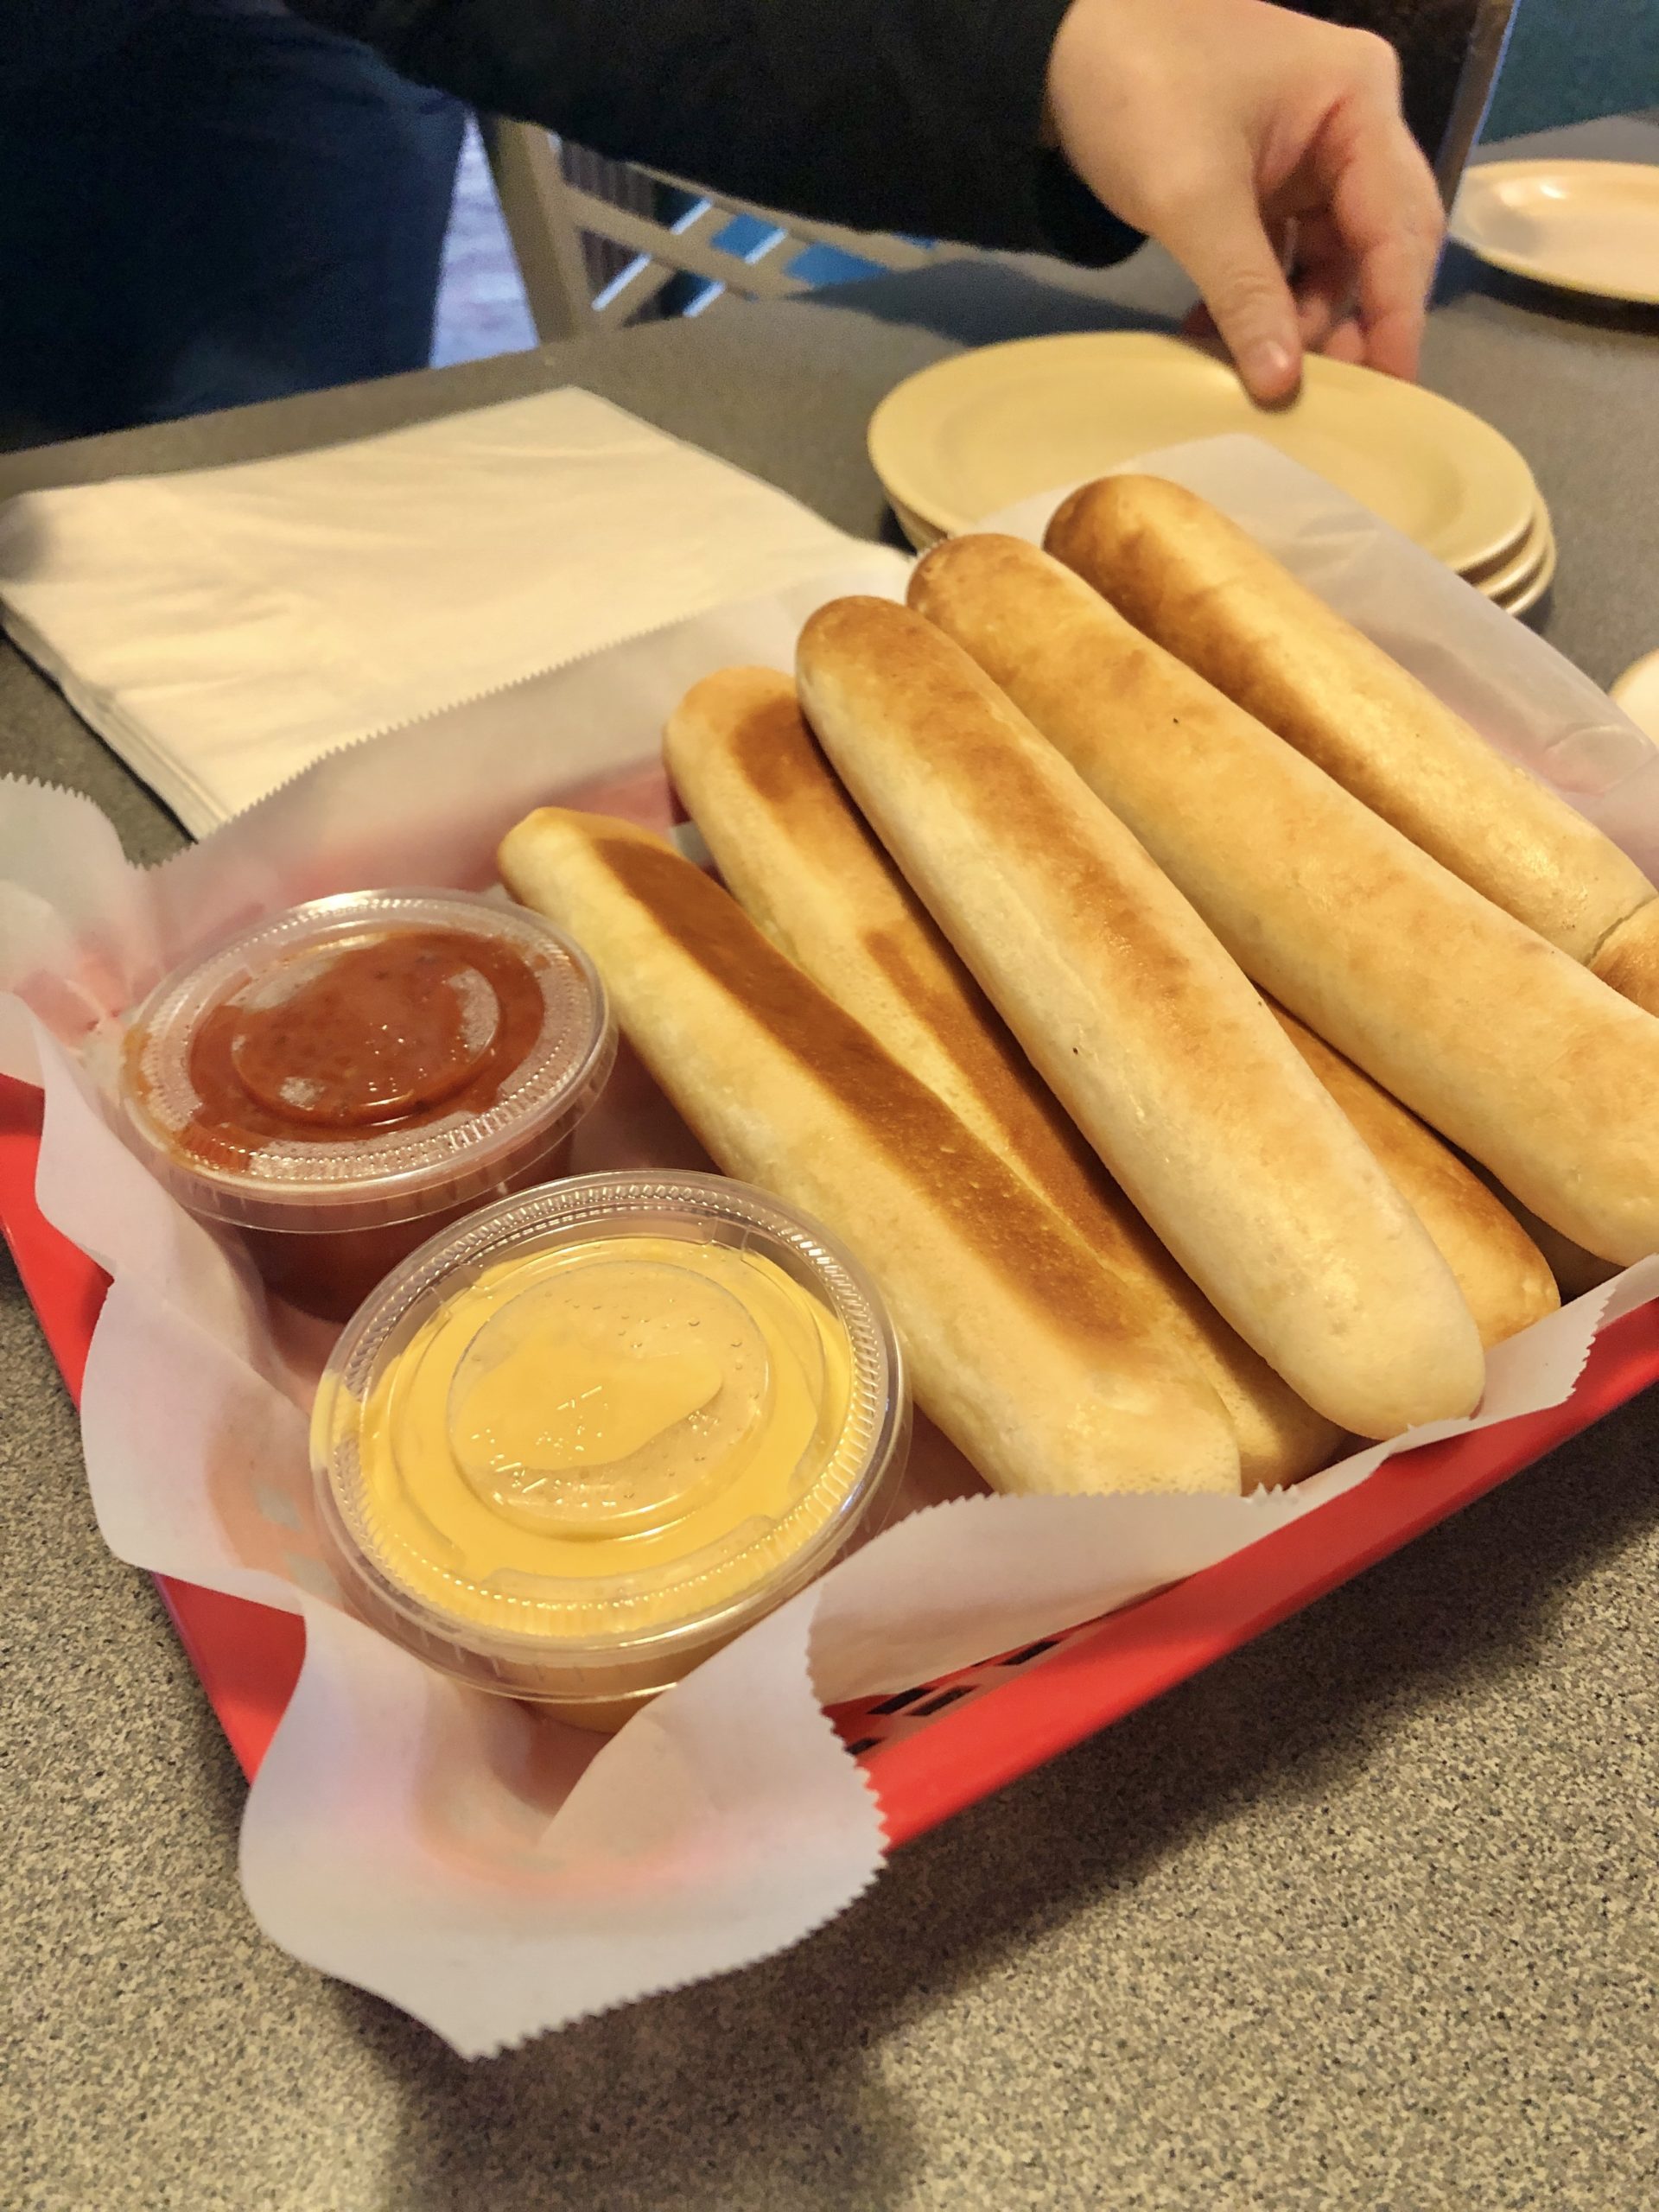 Bread Sticks from Pizza King